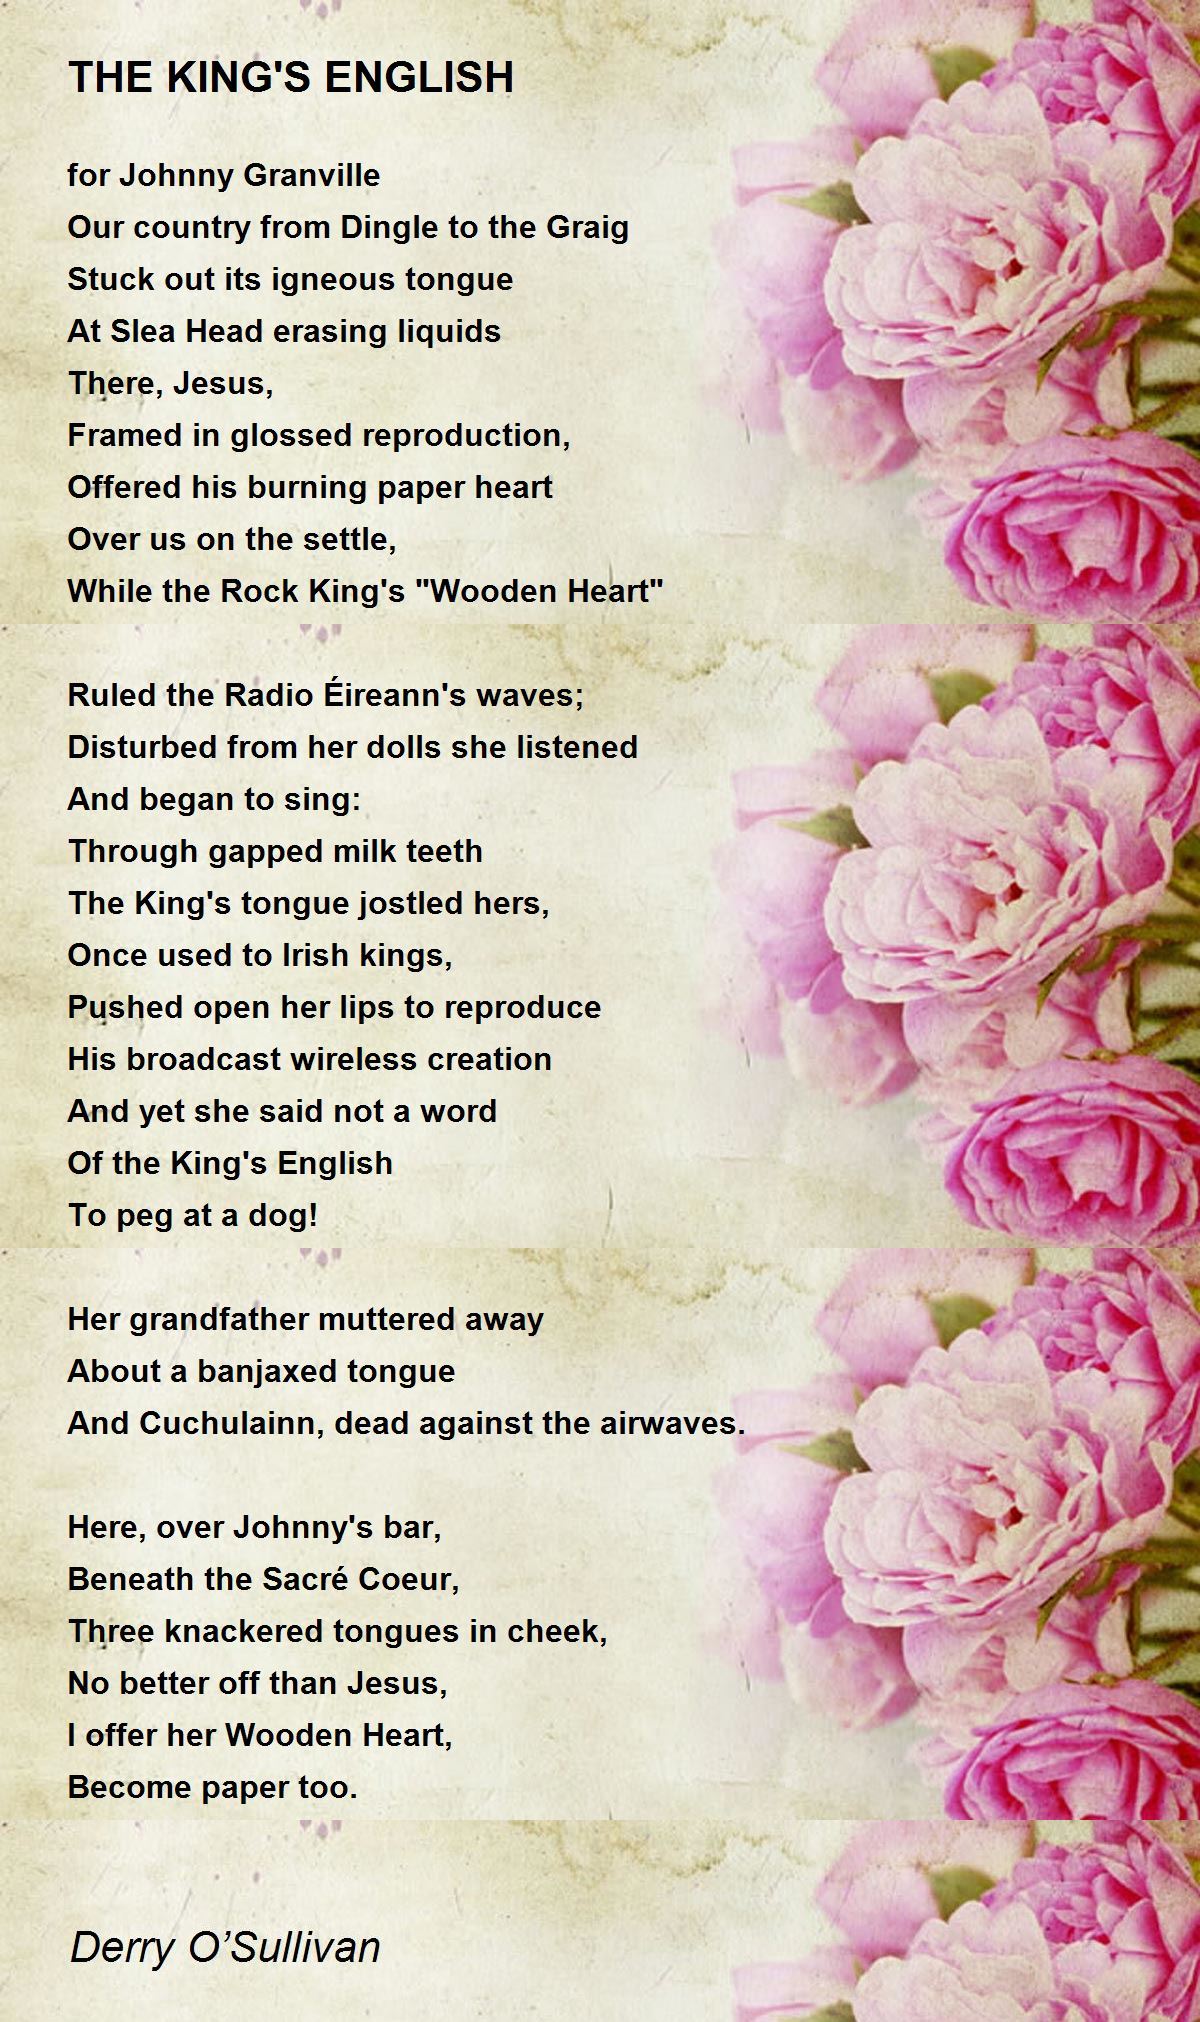 THE KING'S ENGLISH - THE KING'S ENGLISH Poem by Derry O'Sullivan